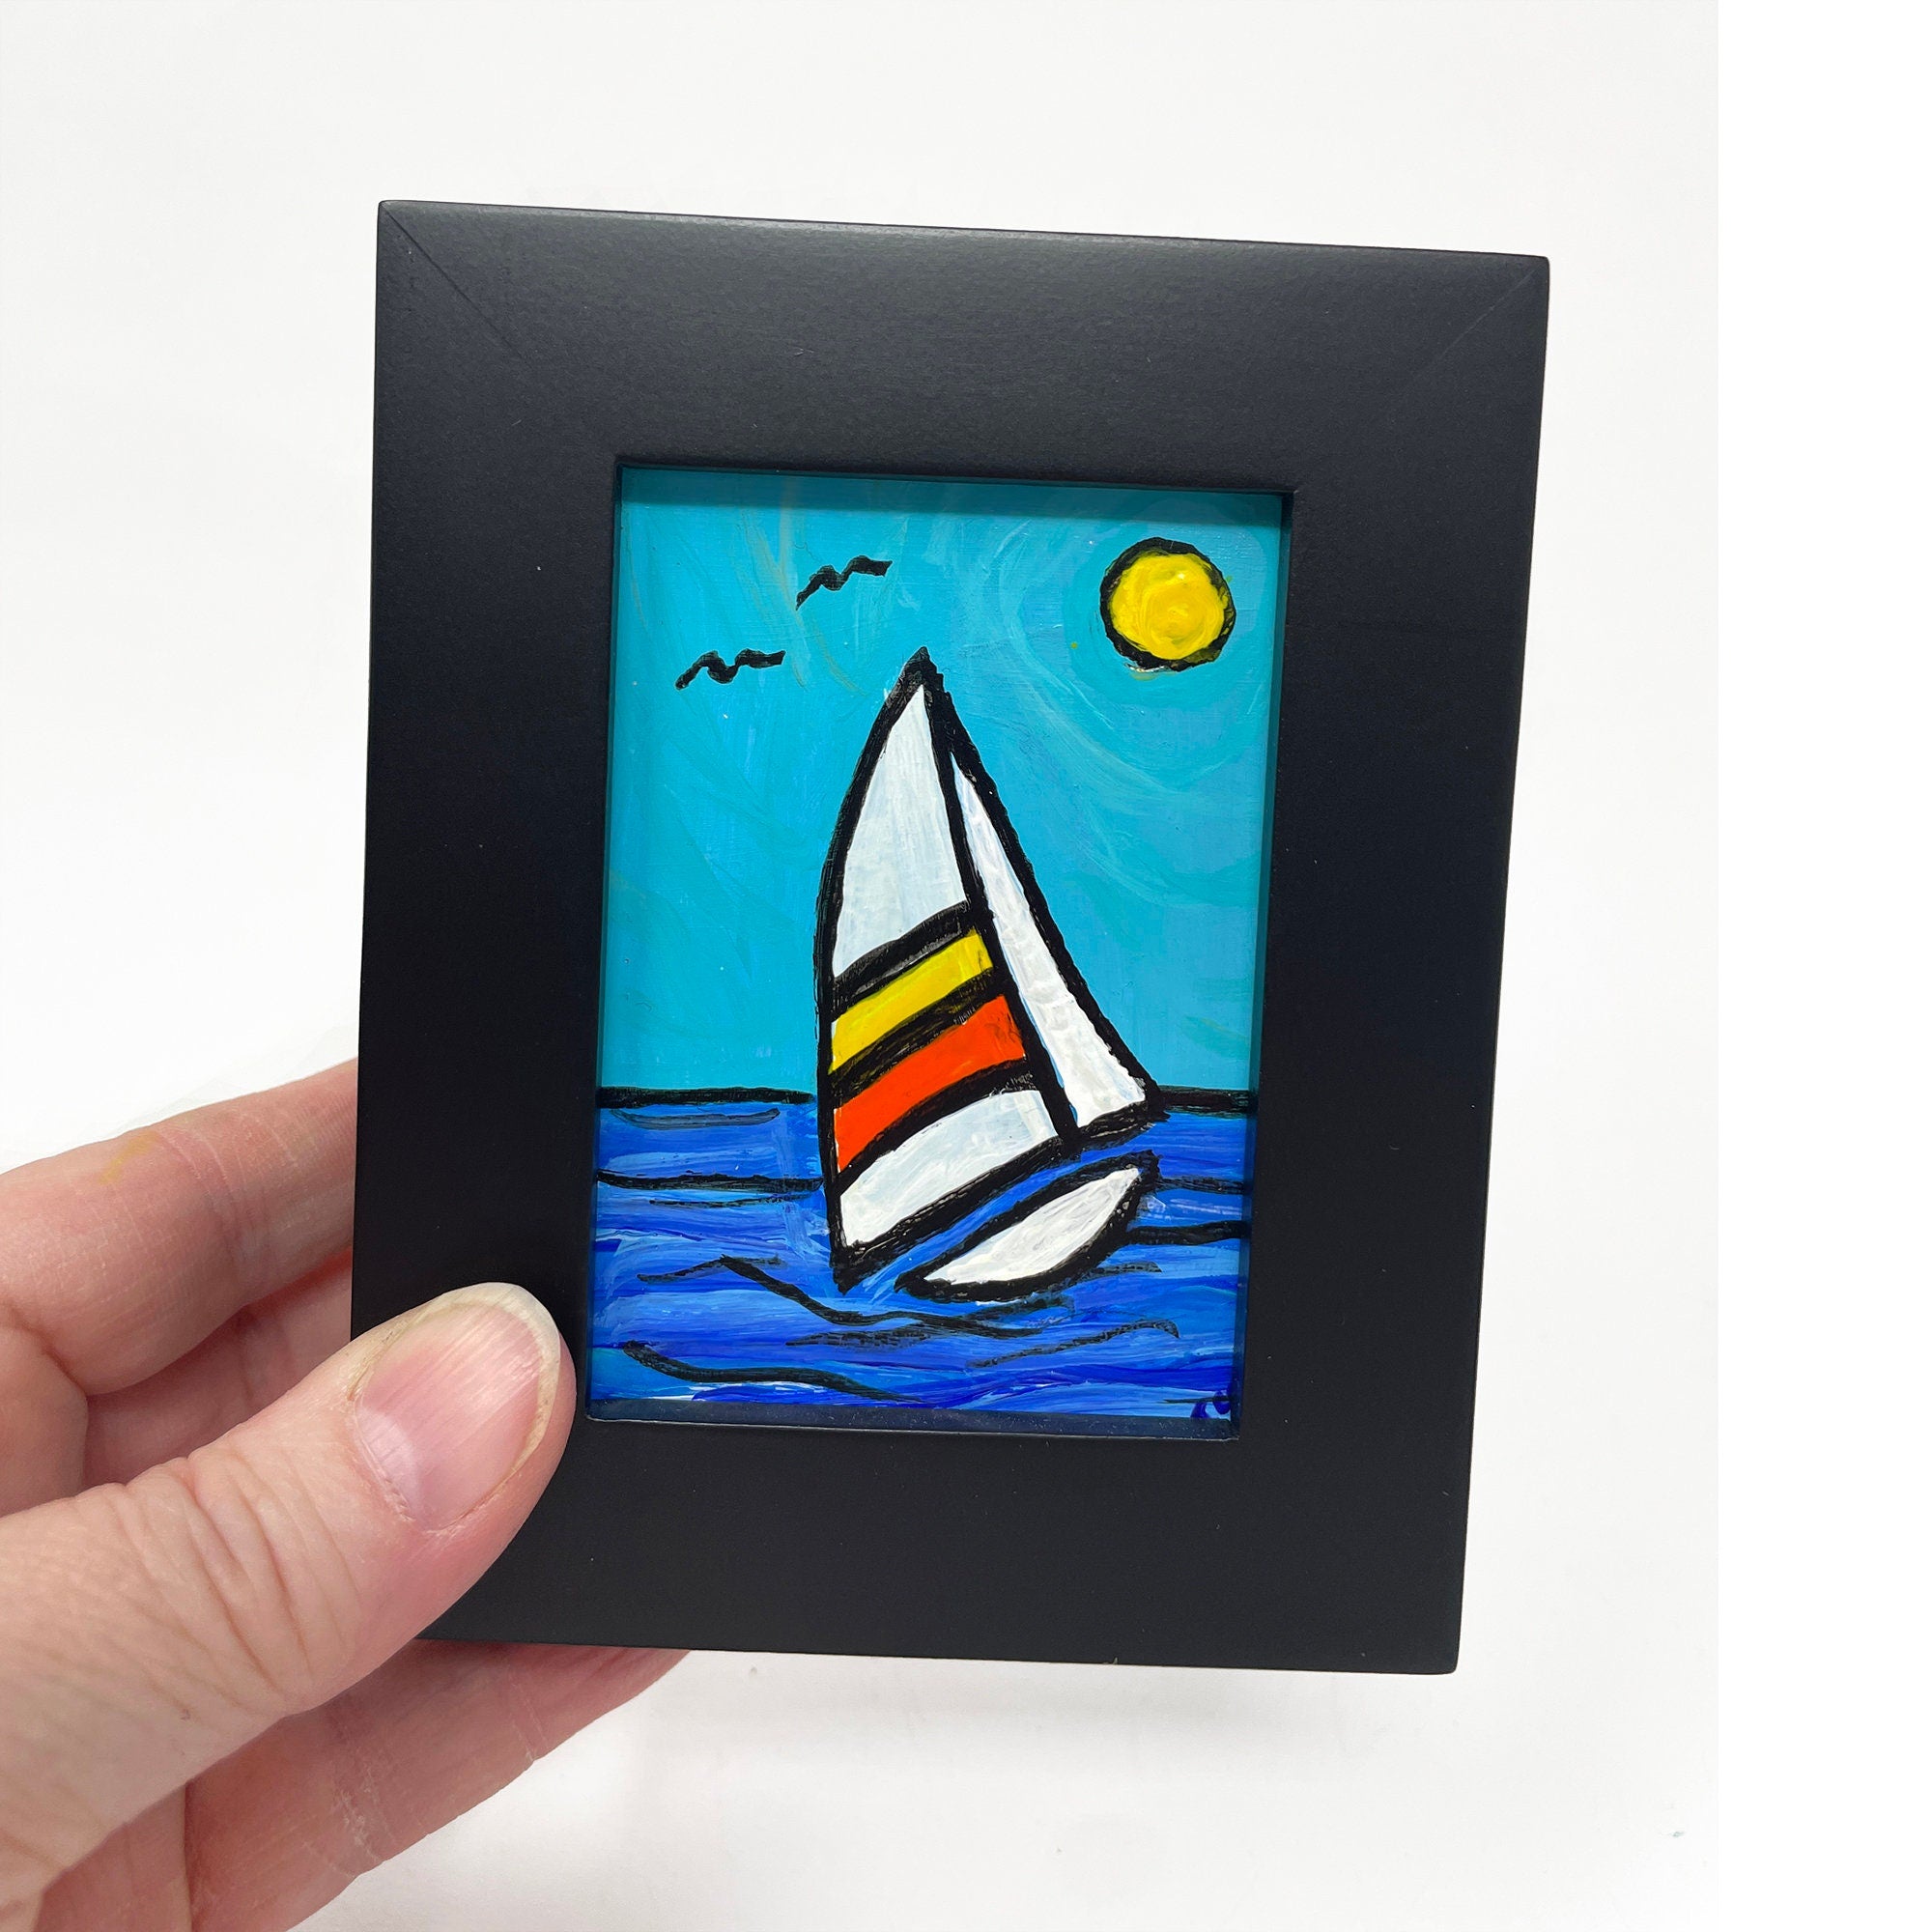 Mini Sailboat Painting in Frame - Original Nautical Art for Desk, Shelf, or Wall - Small Miniature Painting